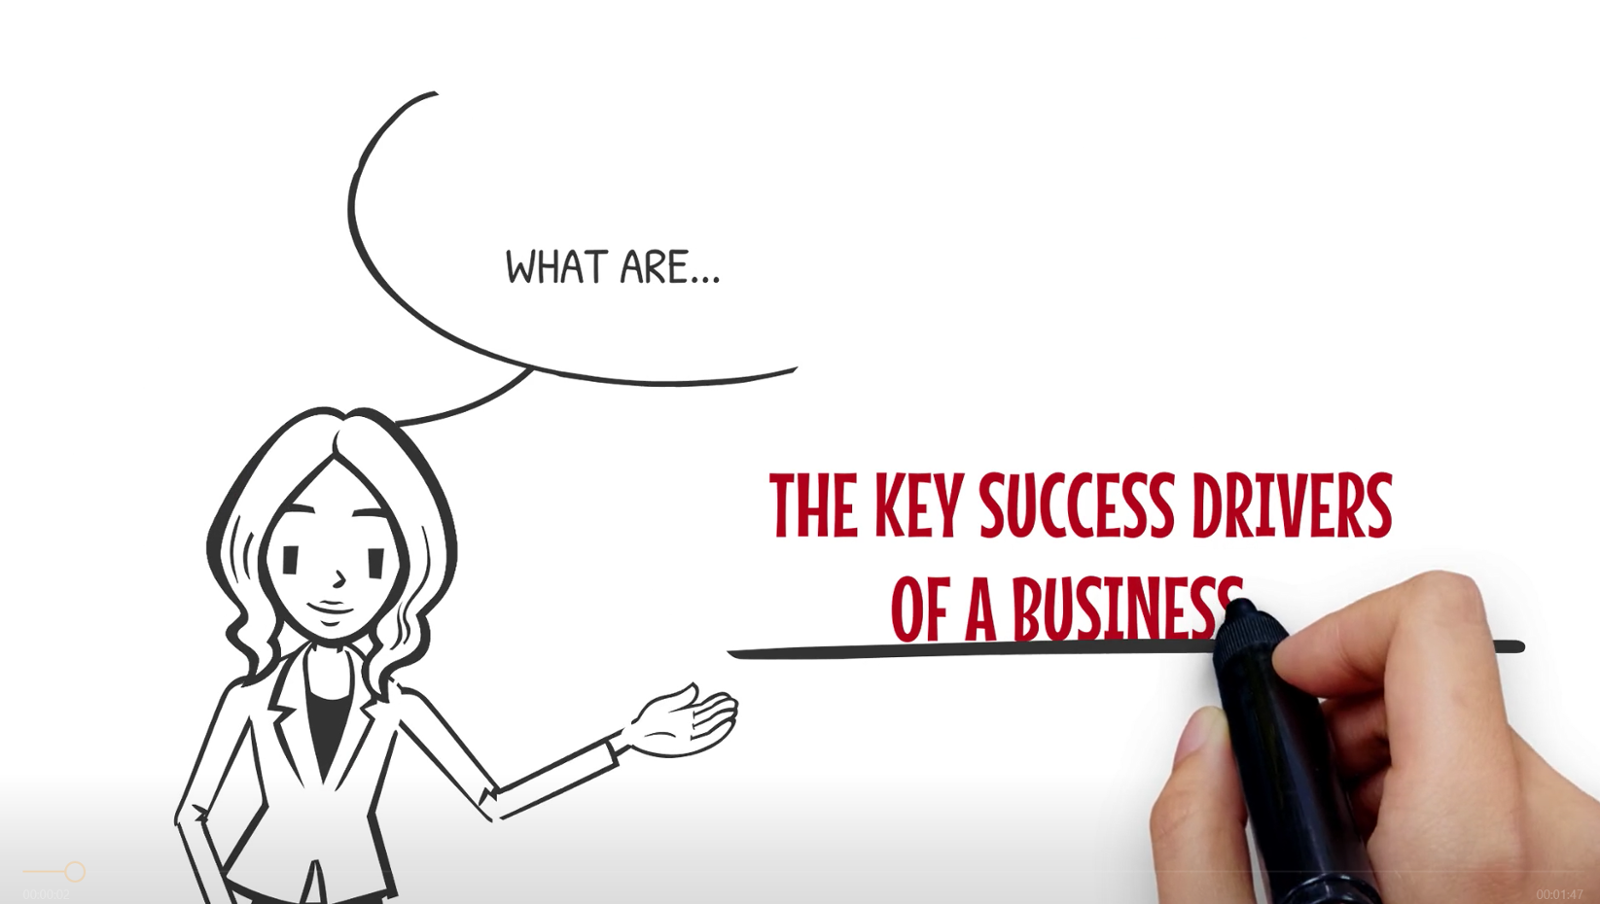 What are some of the key success drivers of a business?